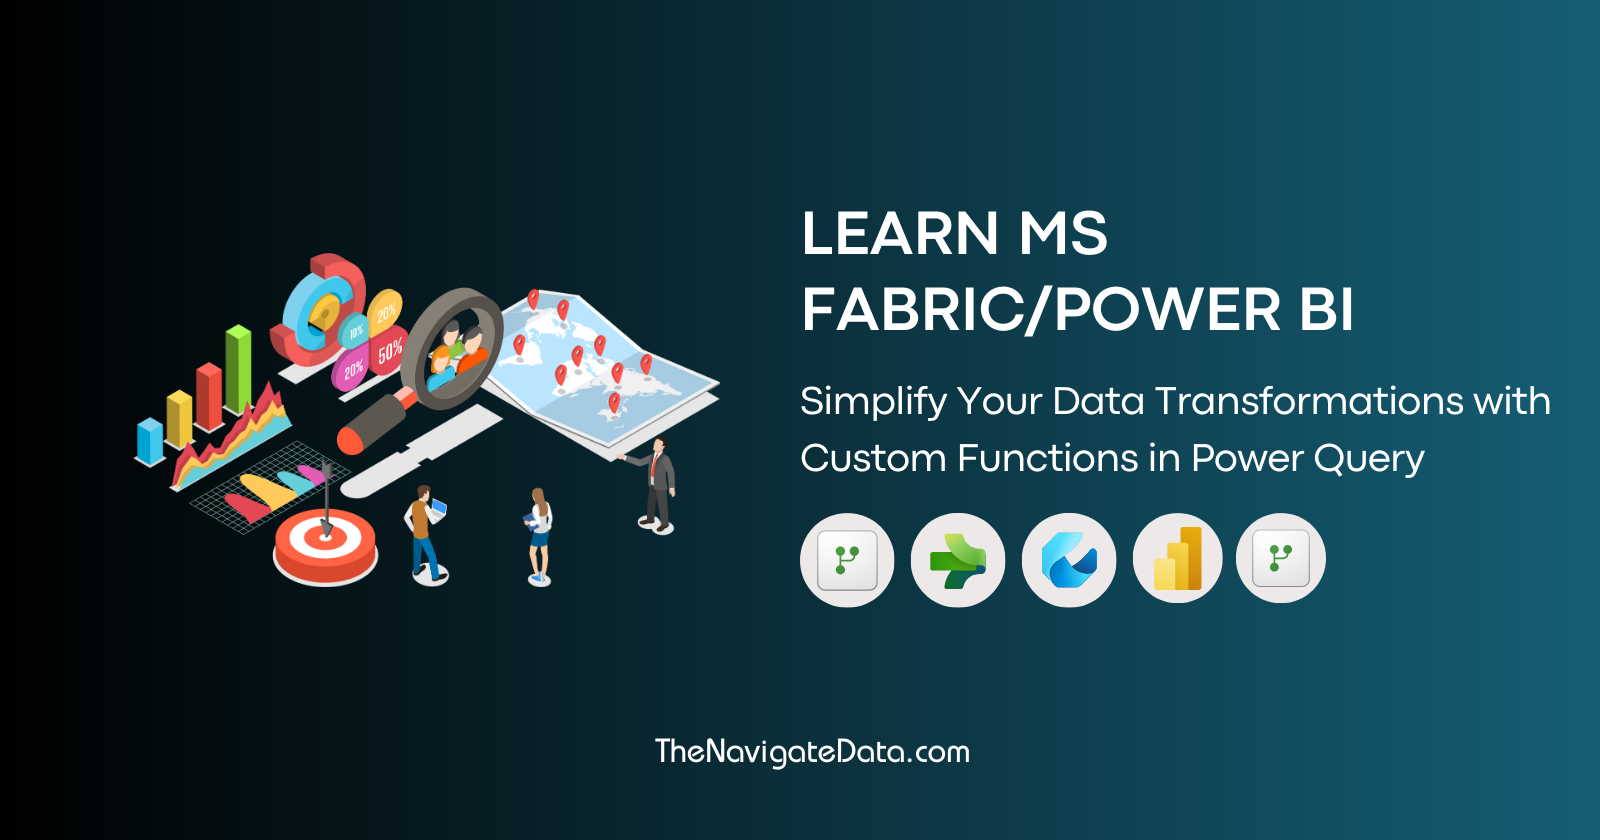 Cover Image for Avoid Repetitive Steps in MS Fabric Dataflow Gen2 with Custom Functions